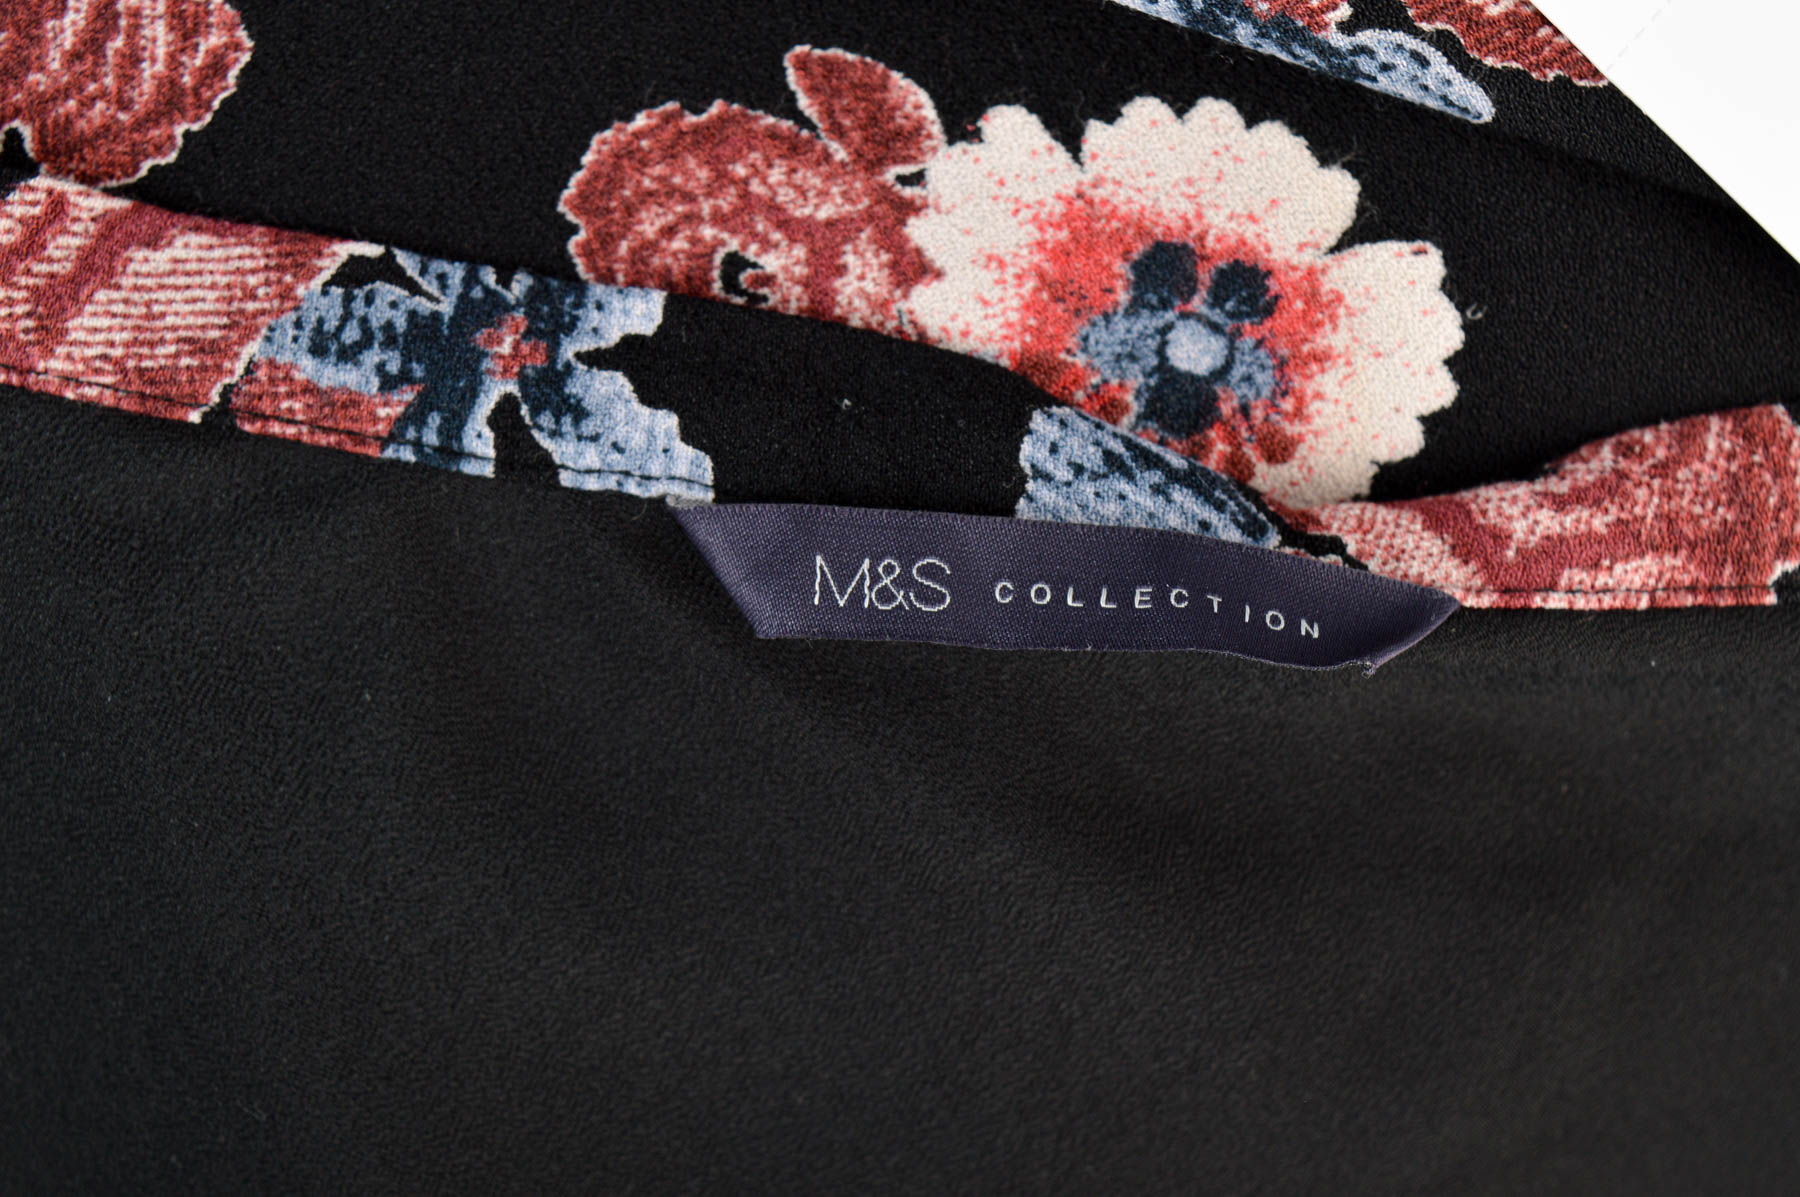 Skirt - M&S COLLECTION - 2